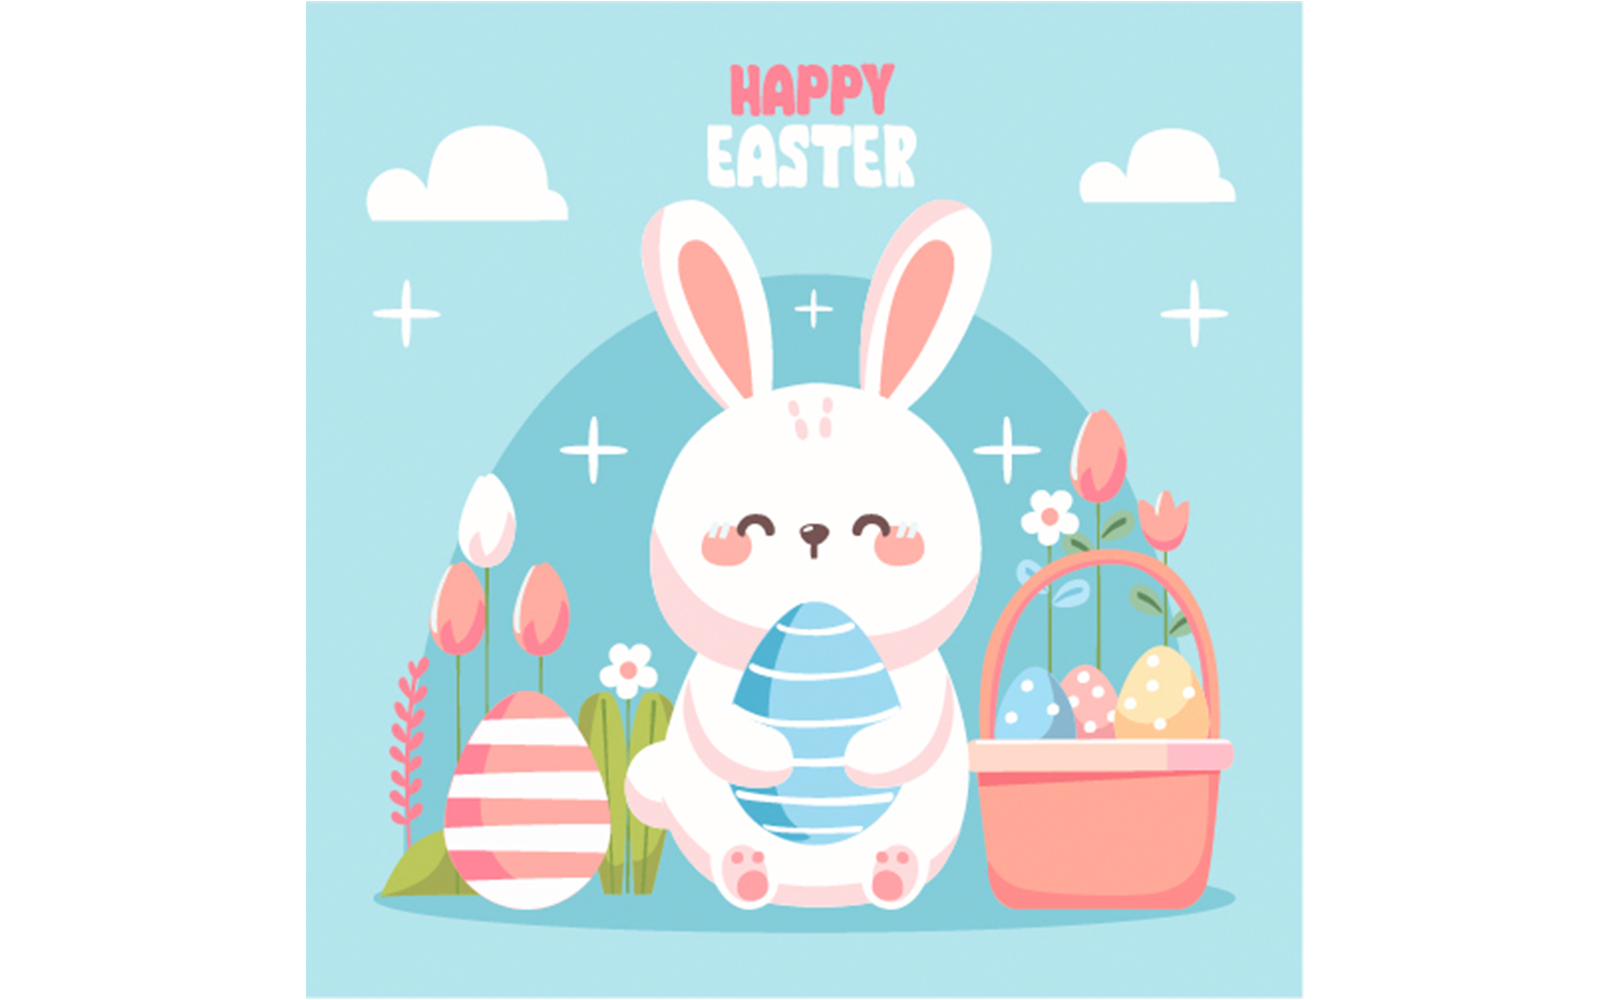 Happy Easter Day with Eggs Illustration